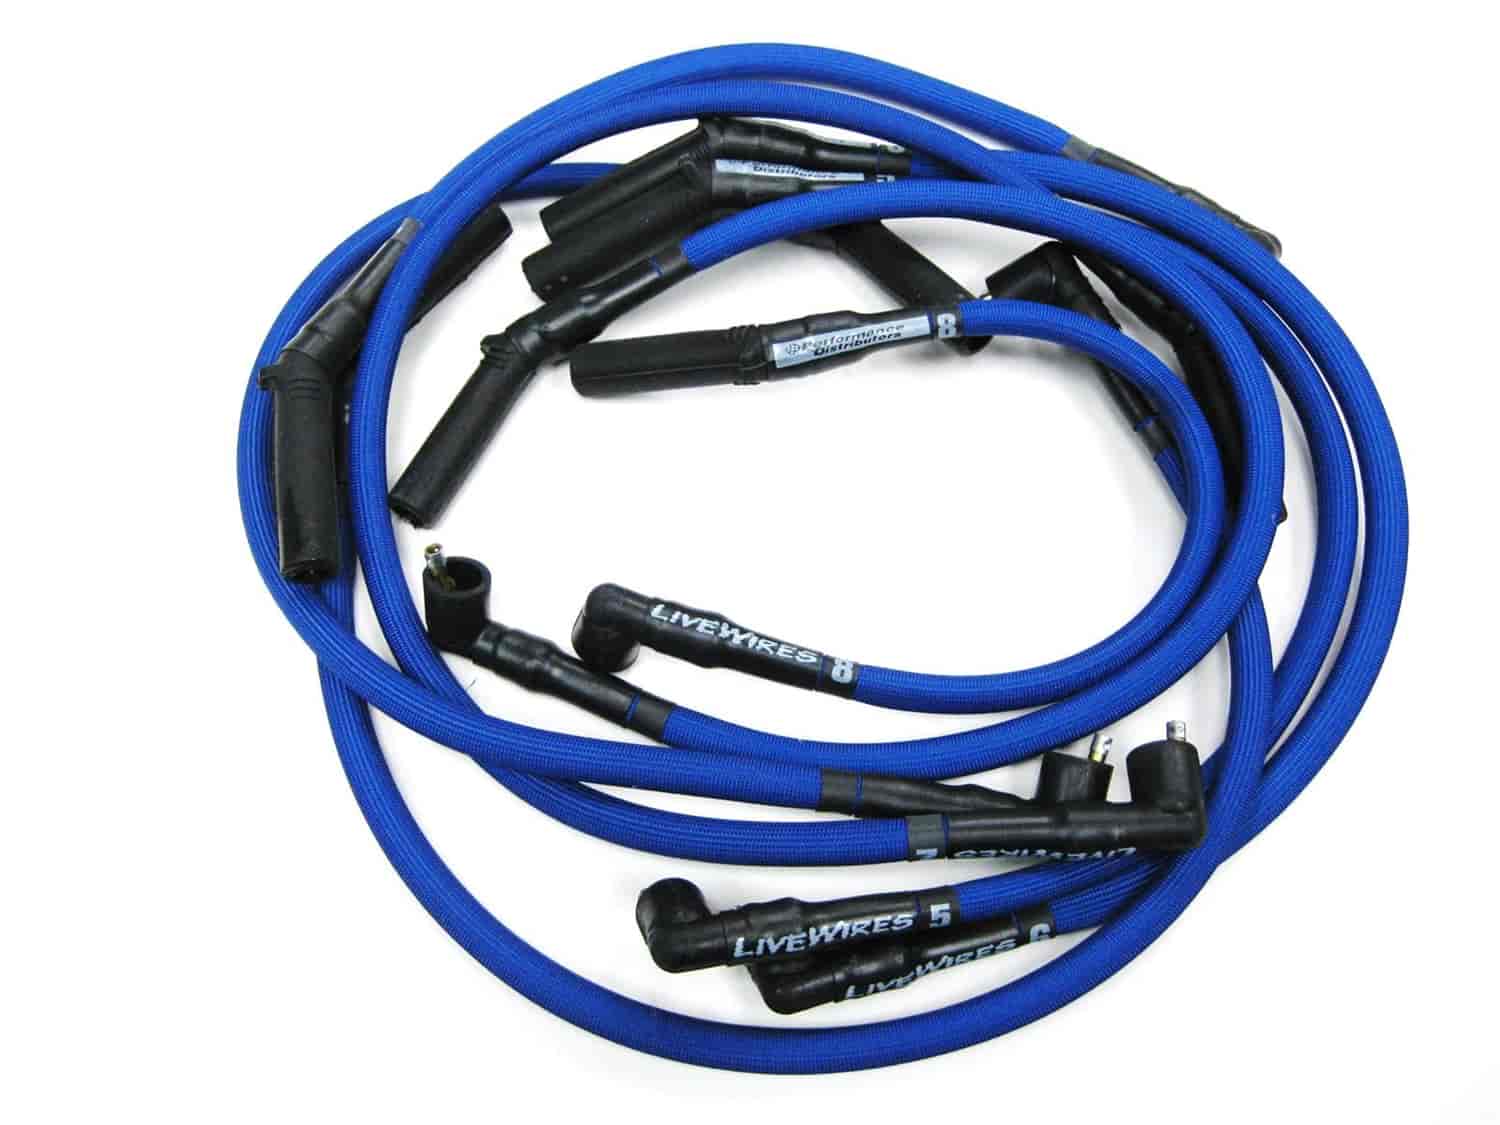 Plug Wires- HEI Term -Blue-1996-?98 4.0L & 4.6L Range Rover and 4.0L Discovery